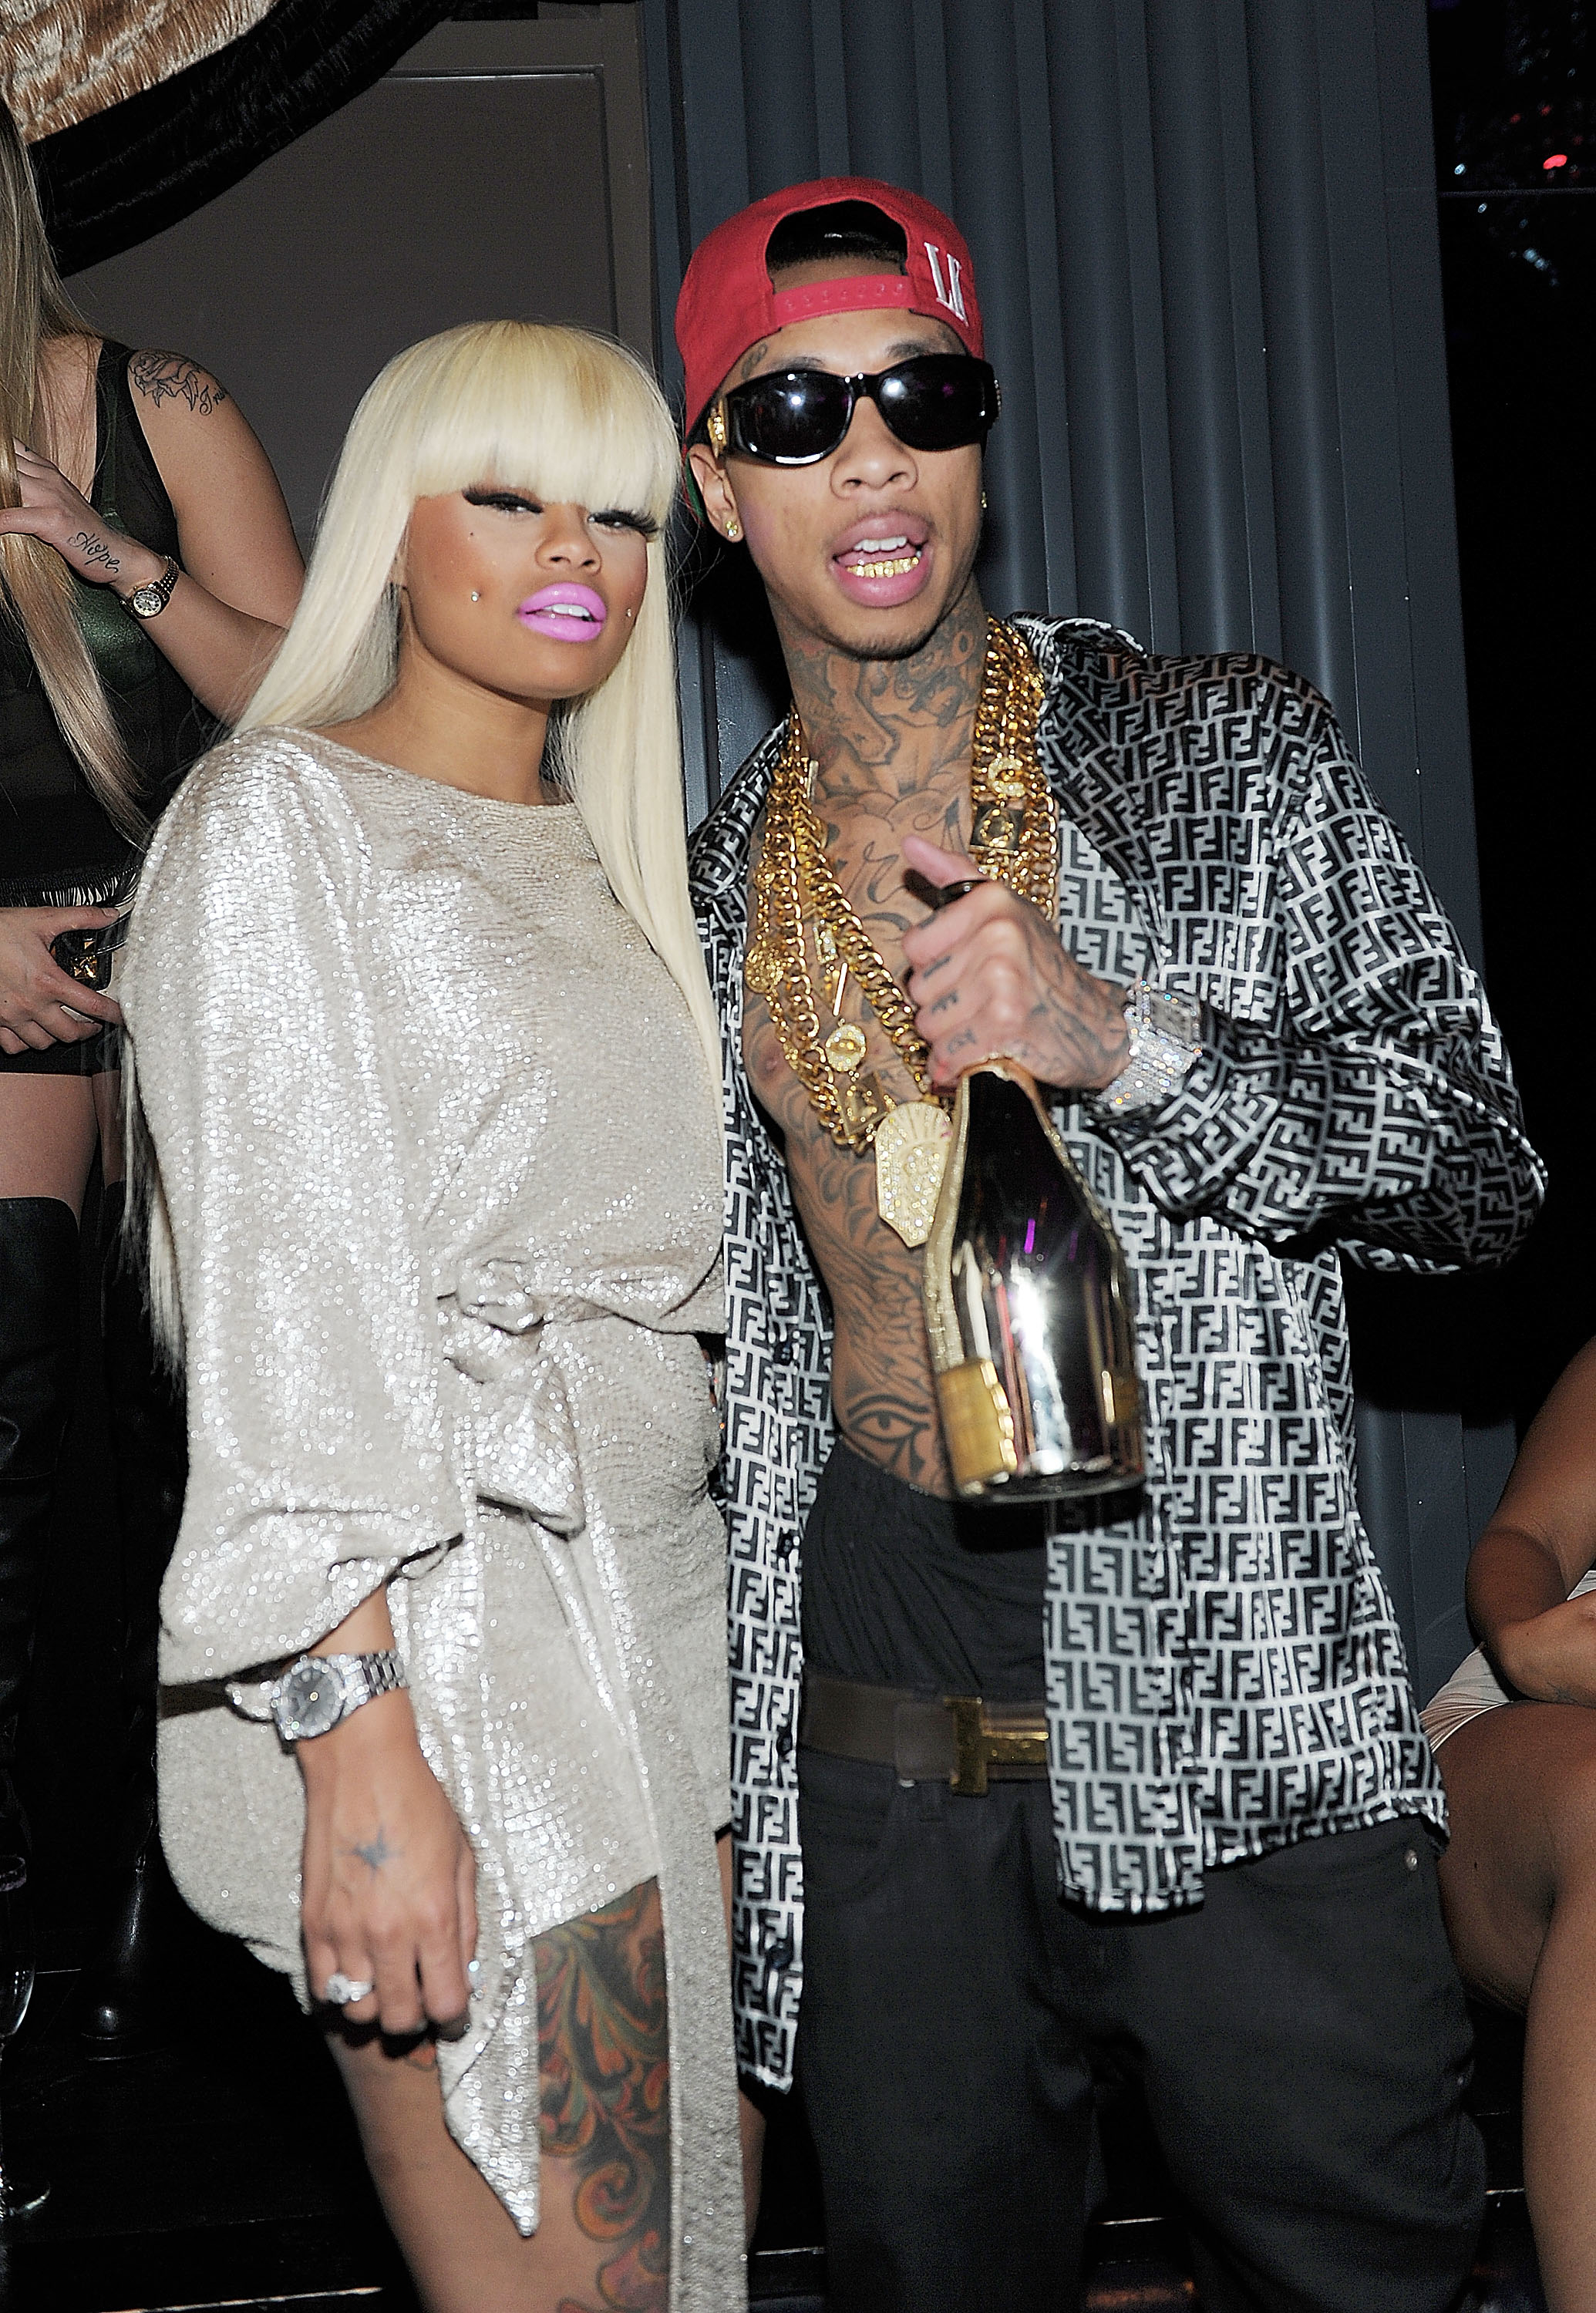 The former couple at an event where Tyga is holding a bottle of champagne